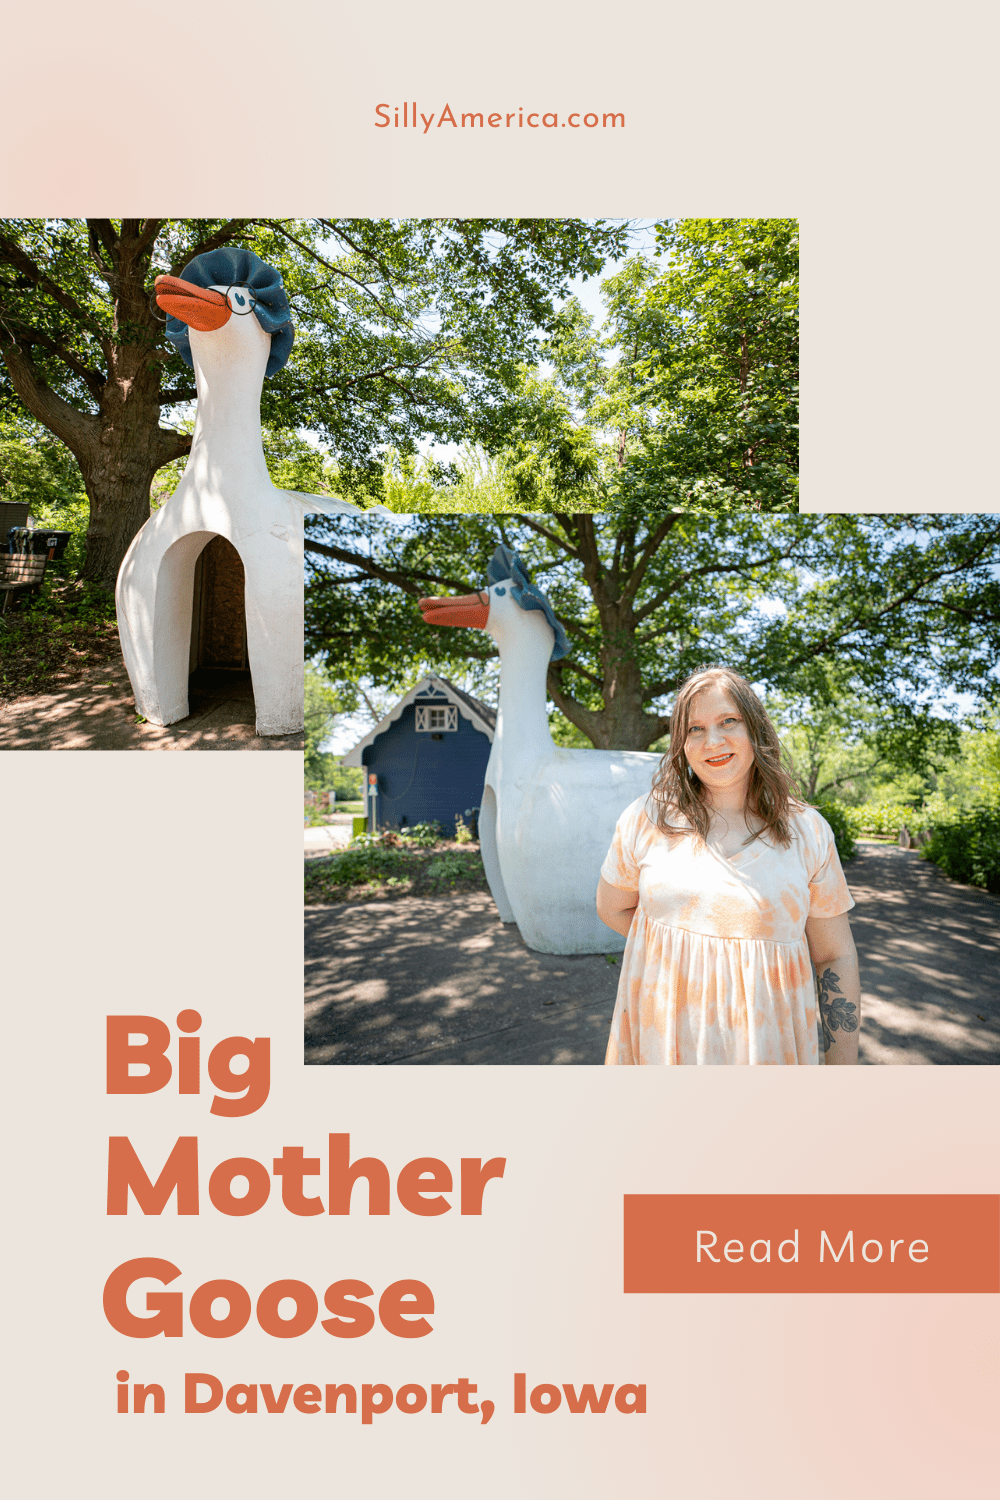 Once upon a time the Big Mother Goose at Fejervary Park in Davenport, Iowa belonged to a different Iowa roadside attraction: Mother Goose Land. Visit this big bird on an Iowa road trip!  #IowaRoadsideAttractions #IowaRoadsideAttraction #RoadsideAttractions #RoadsideAttraction #RoadTrip #IowaRoadTrip #IowaThingsToDo #IowaRoadTripBucketLists #IowaBucketList #IowaRoadTripIdeas #IowaTravel